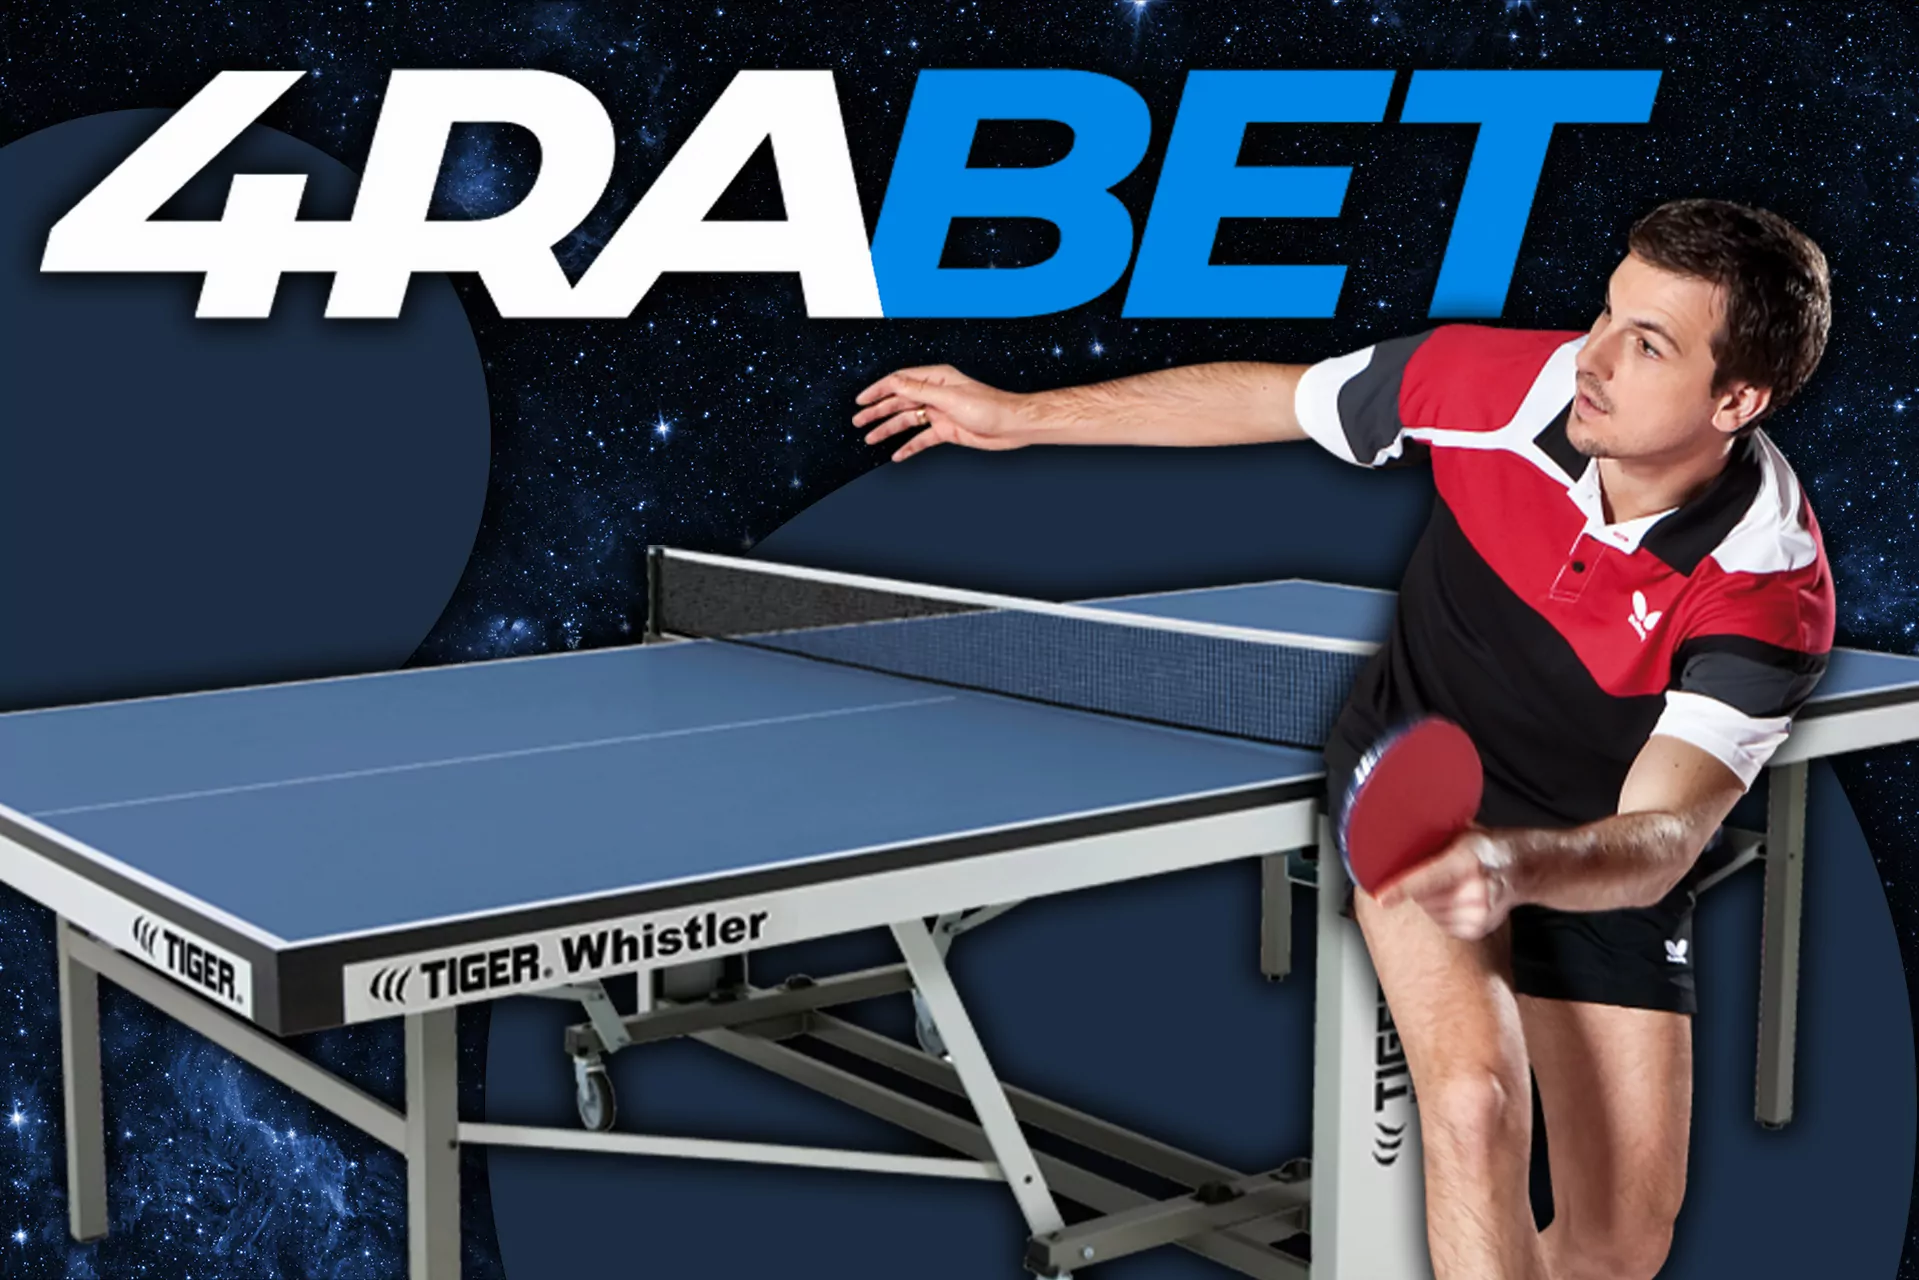 You can bet on table tennis at 4rabet.